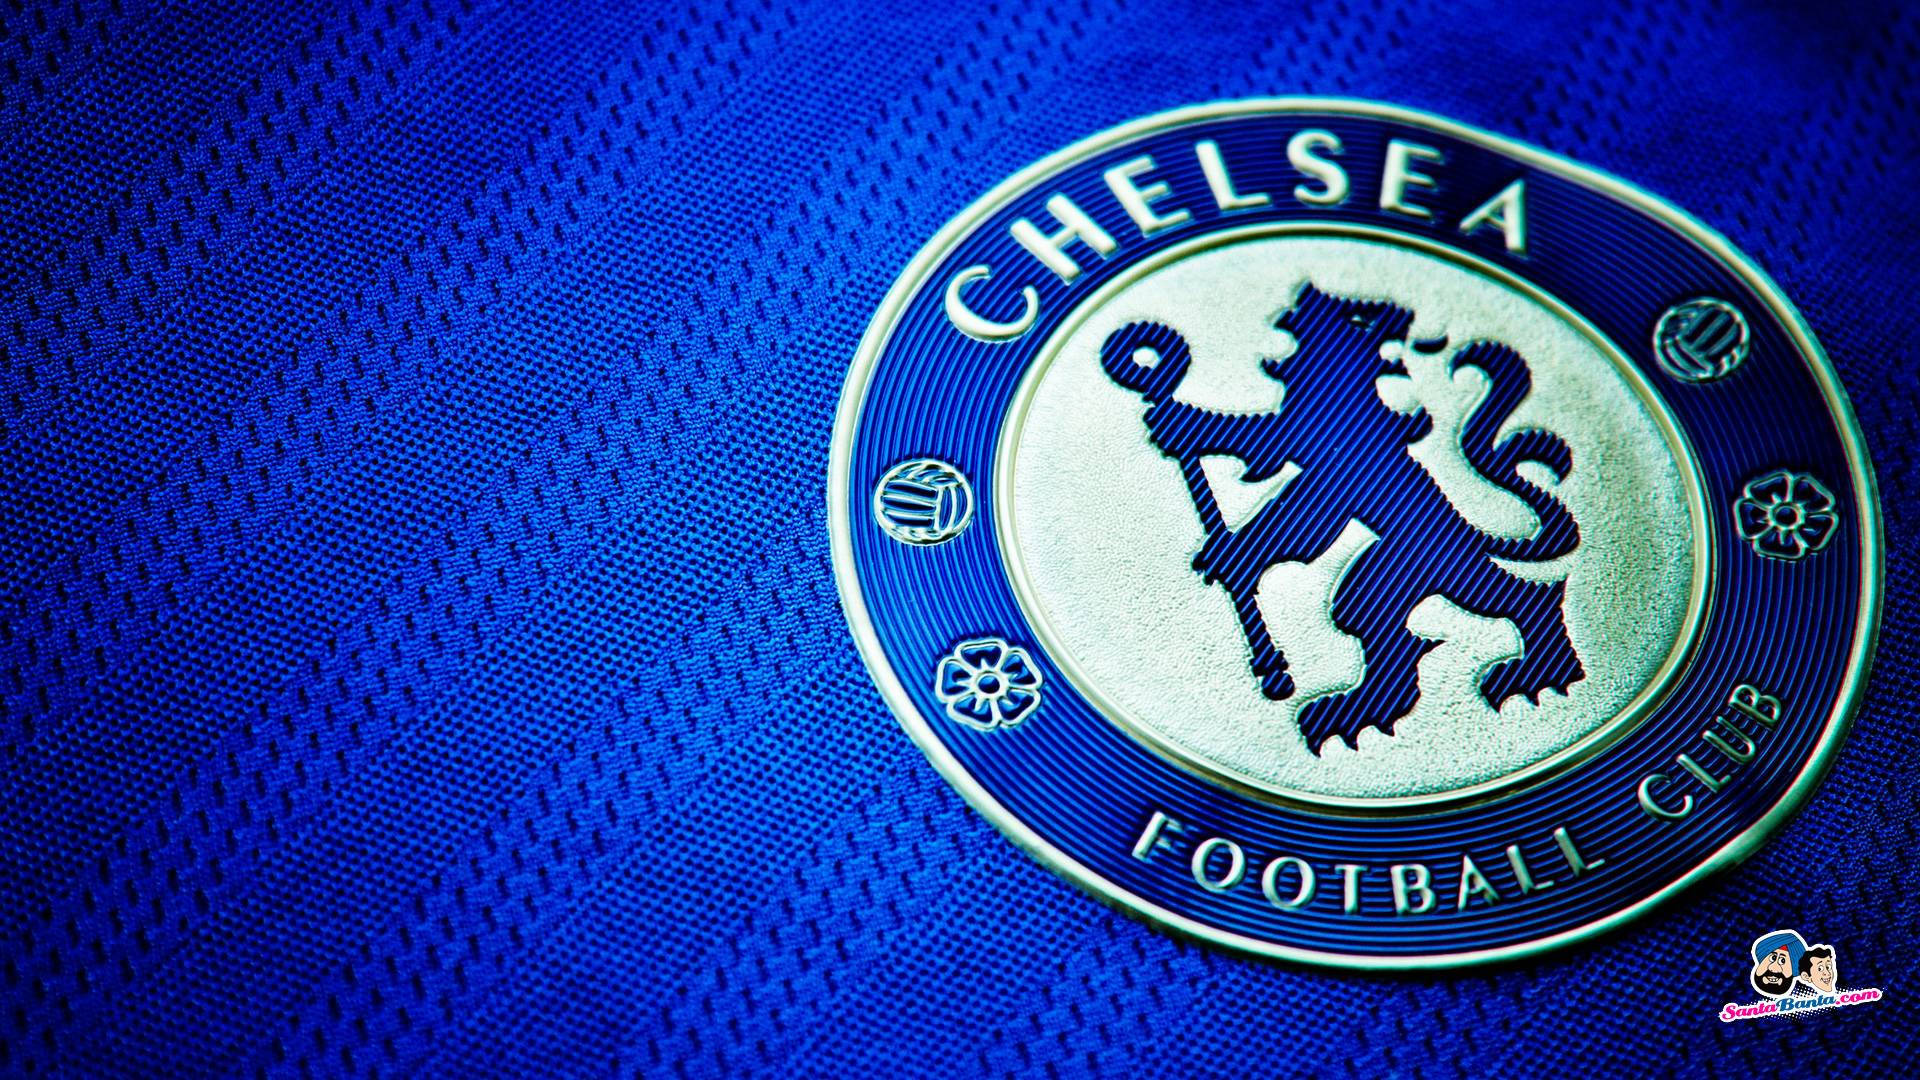 Download Chelsea Fc Jersey Close-up Wallpaper 